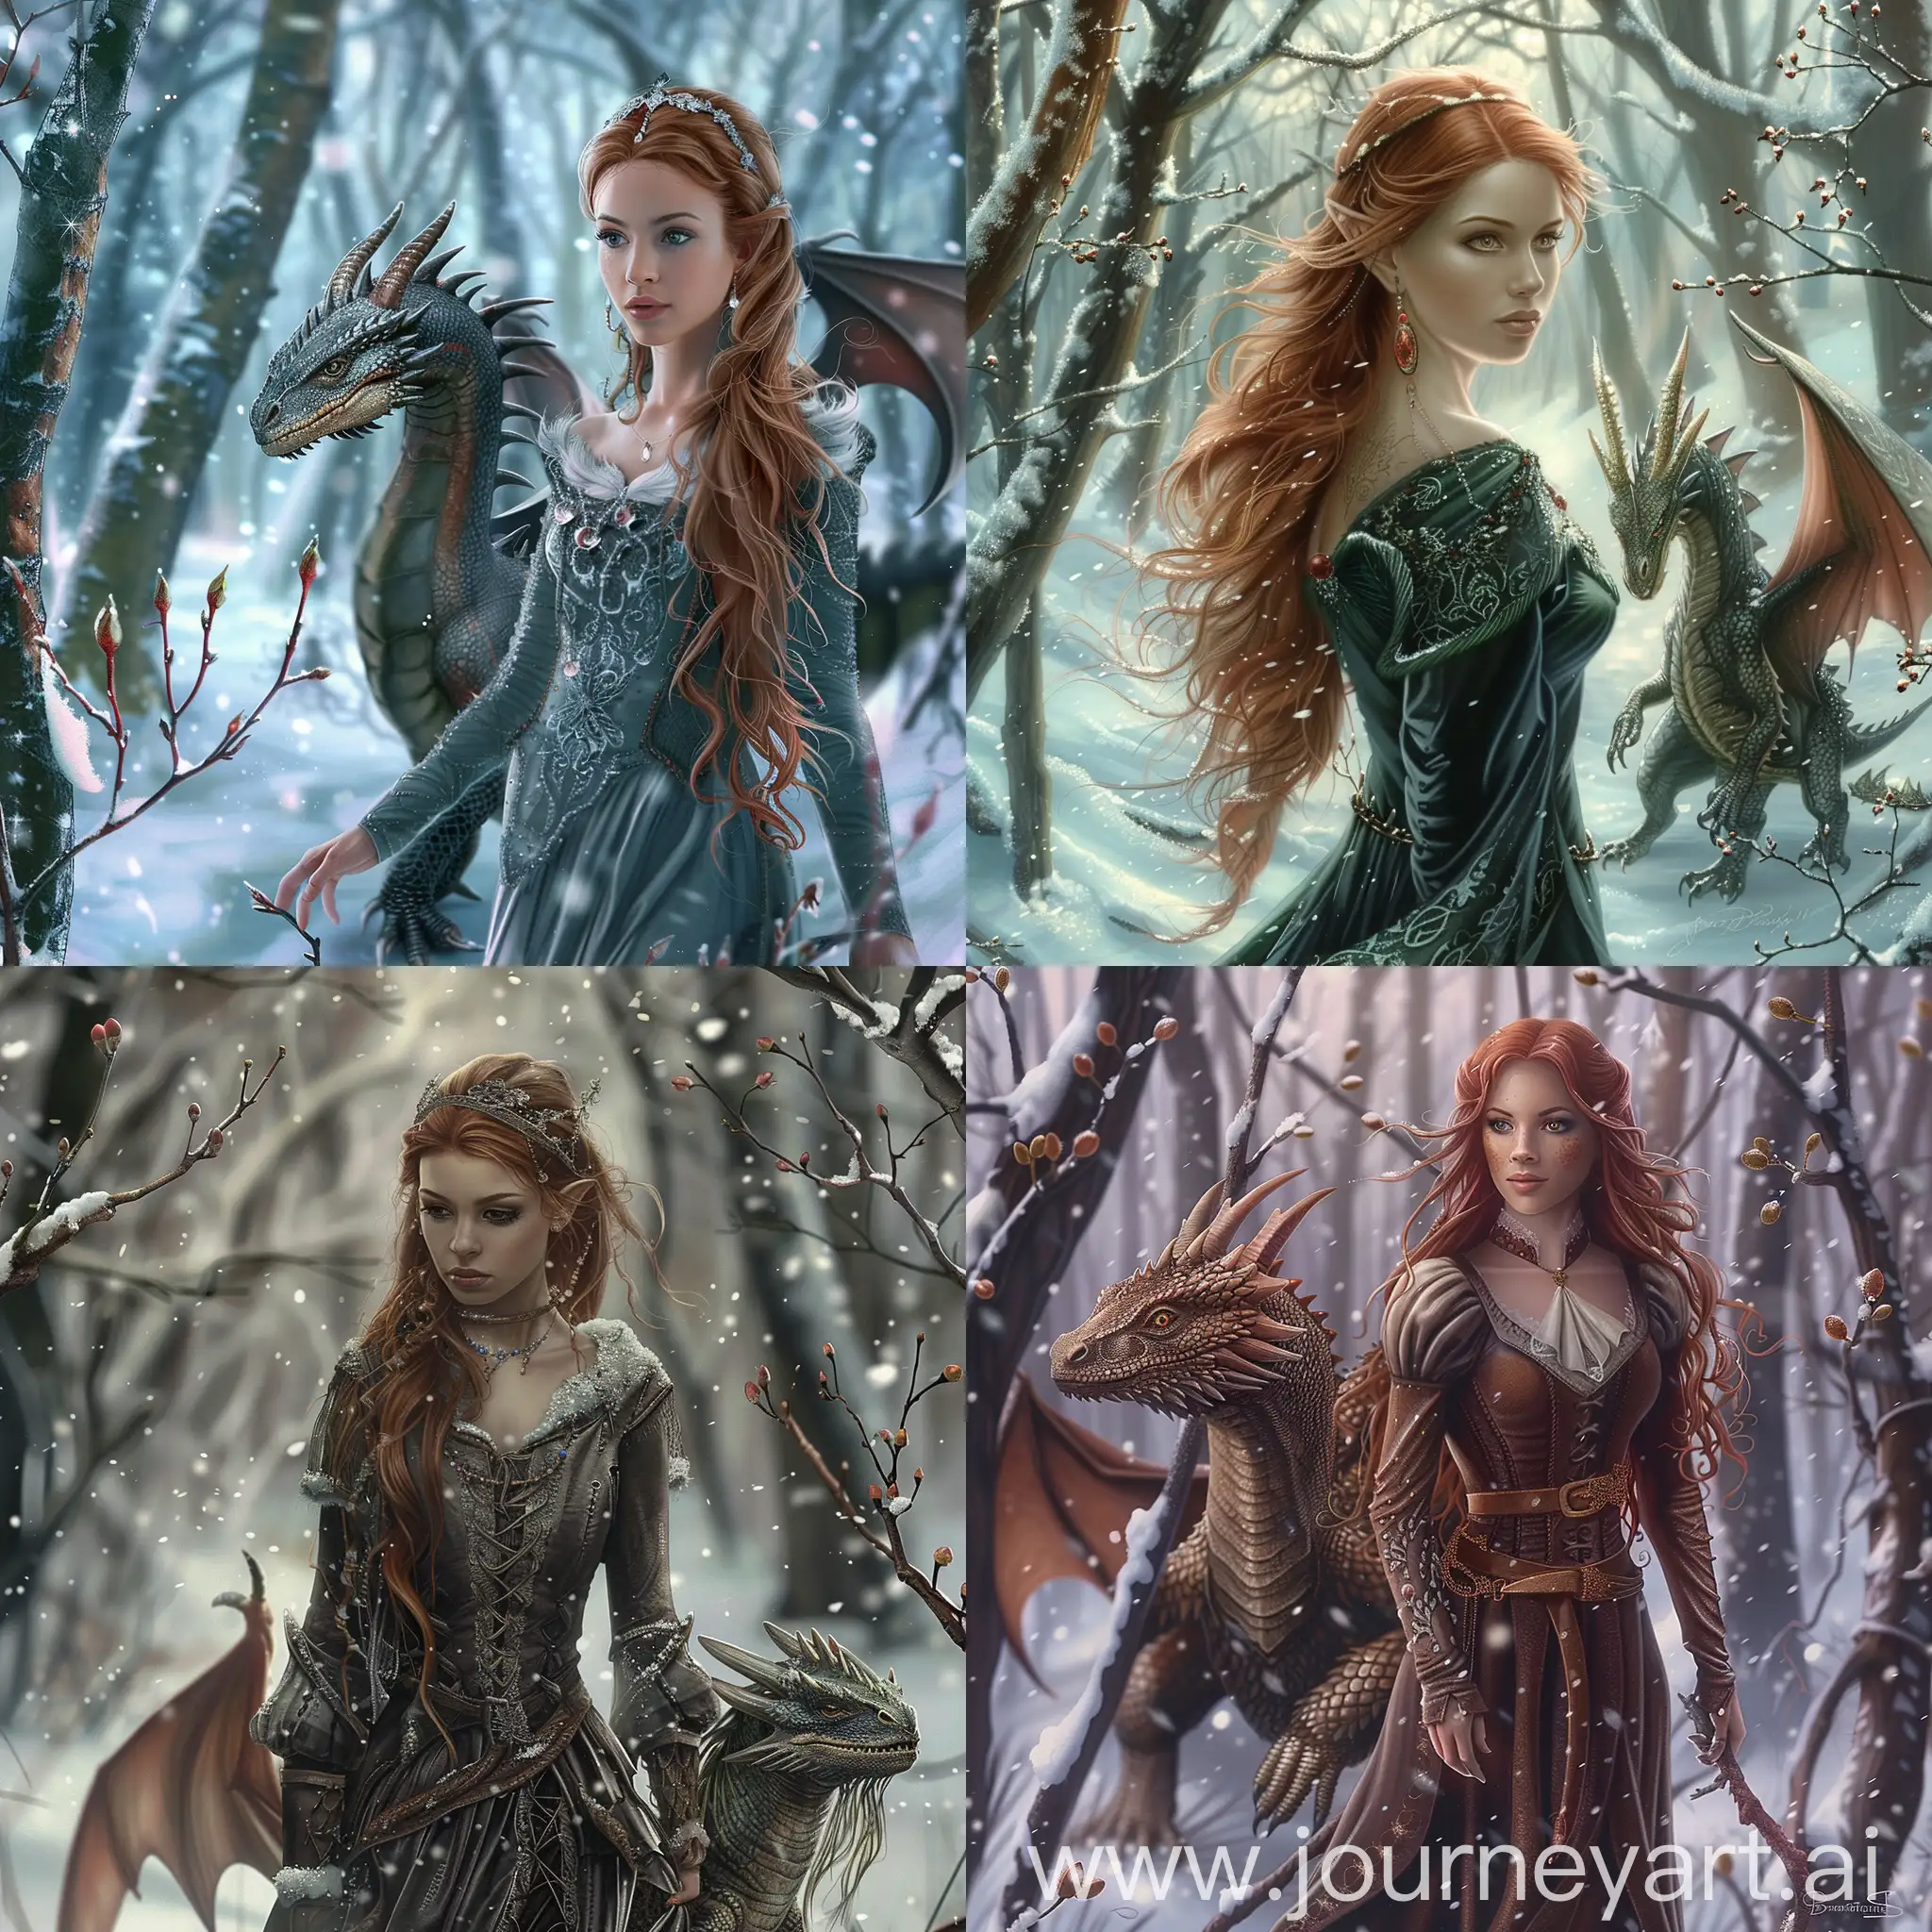 Enchanting-Medieval-Lady-Strolling-with-Majestic-Dragon-in-Snowy-Forest